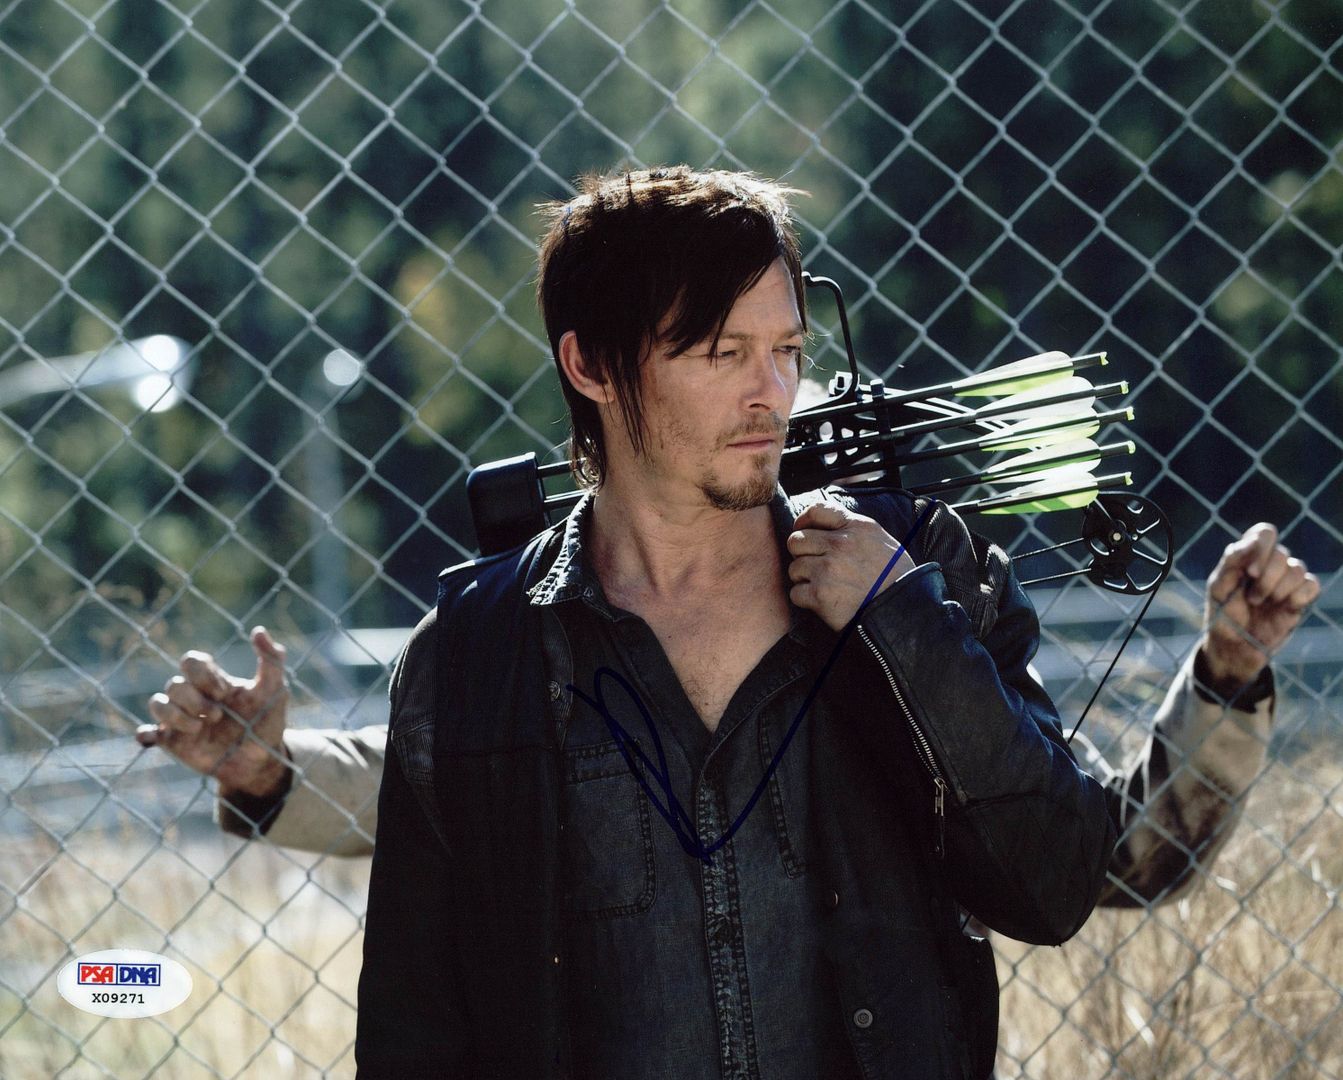 Press Pass Collectibles NORMAN REEDUS THE WALKING DEAD SIGNED AUTHENTIC 8X10 PHOTO PSA/DNA #X09271